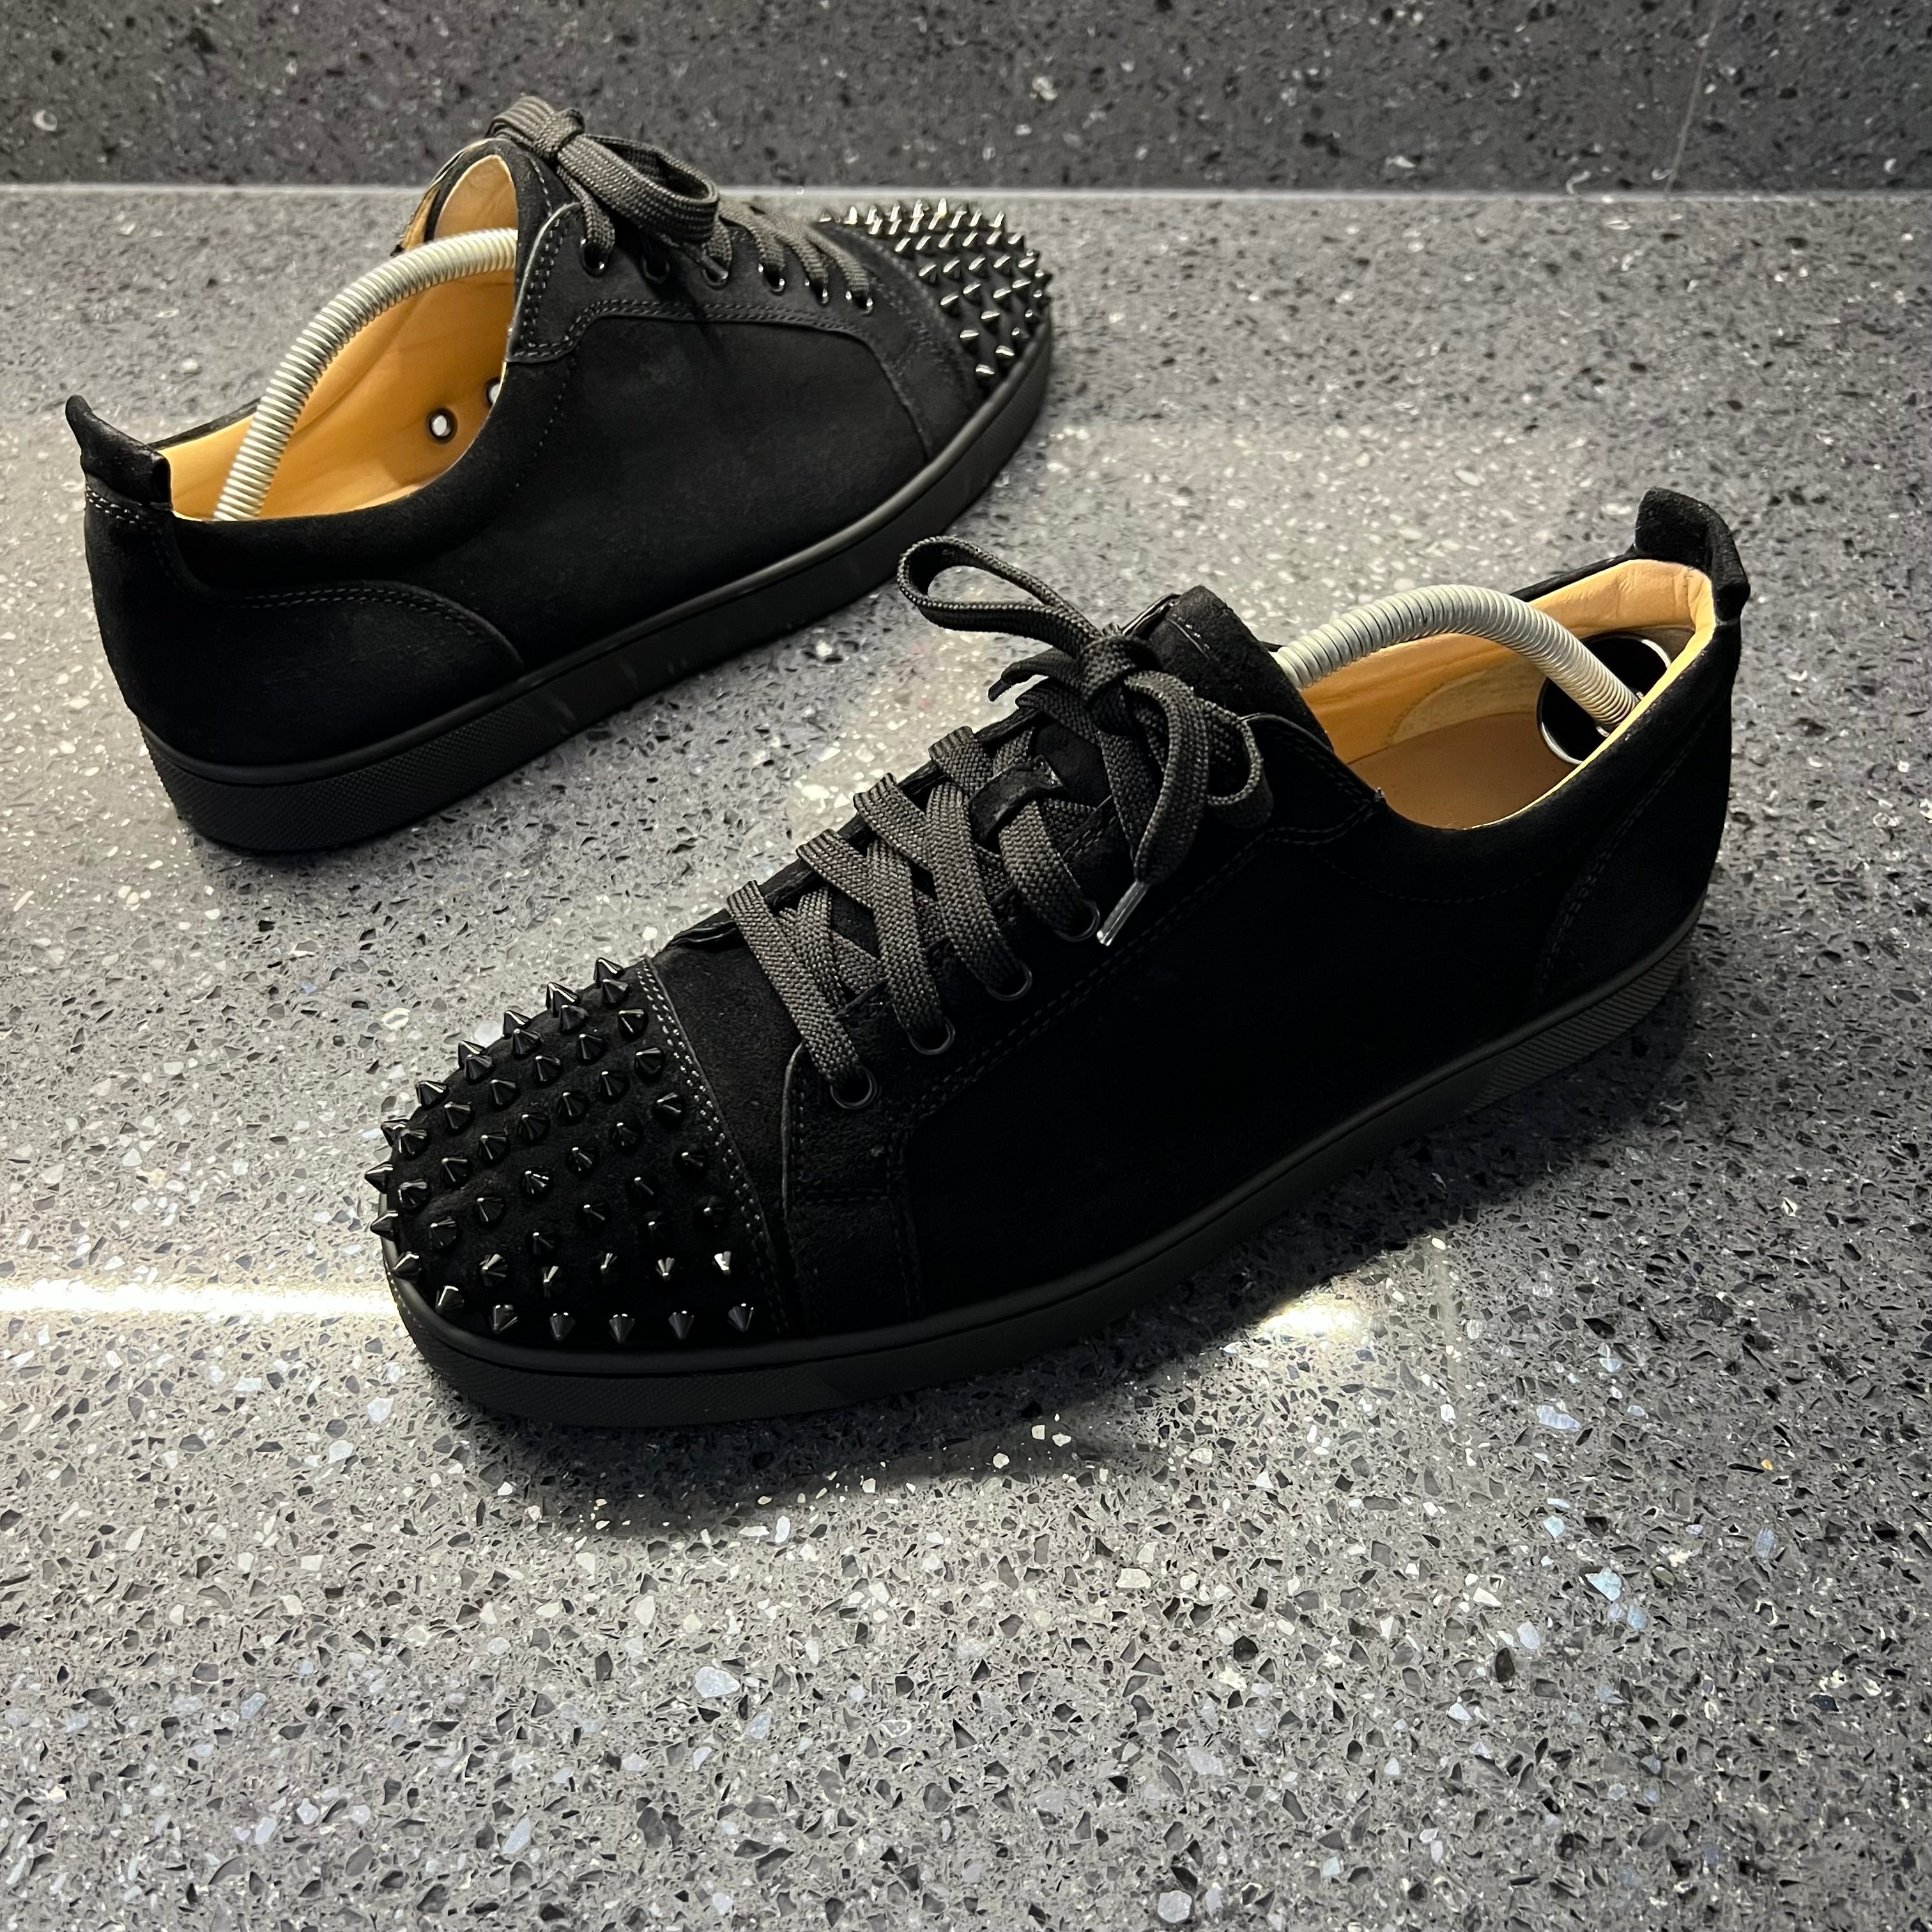 Christian Louboutin Mens Louis junior spike sneaker-43.5; 100% Authentic  and New